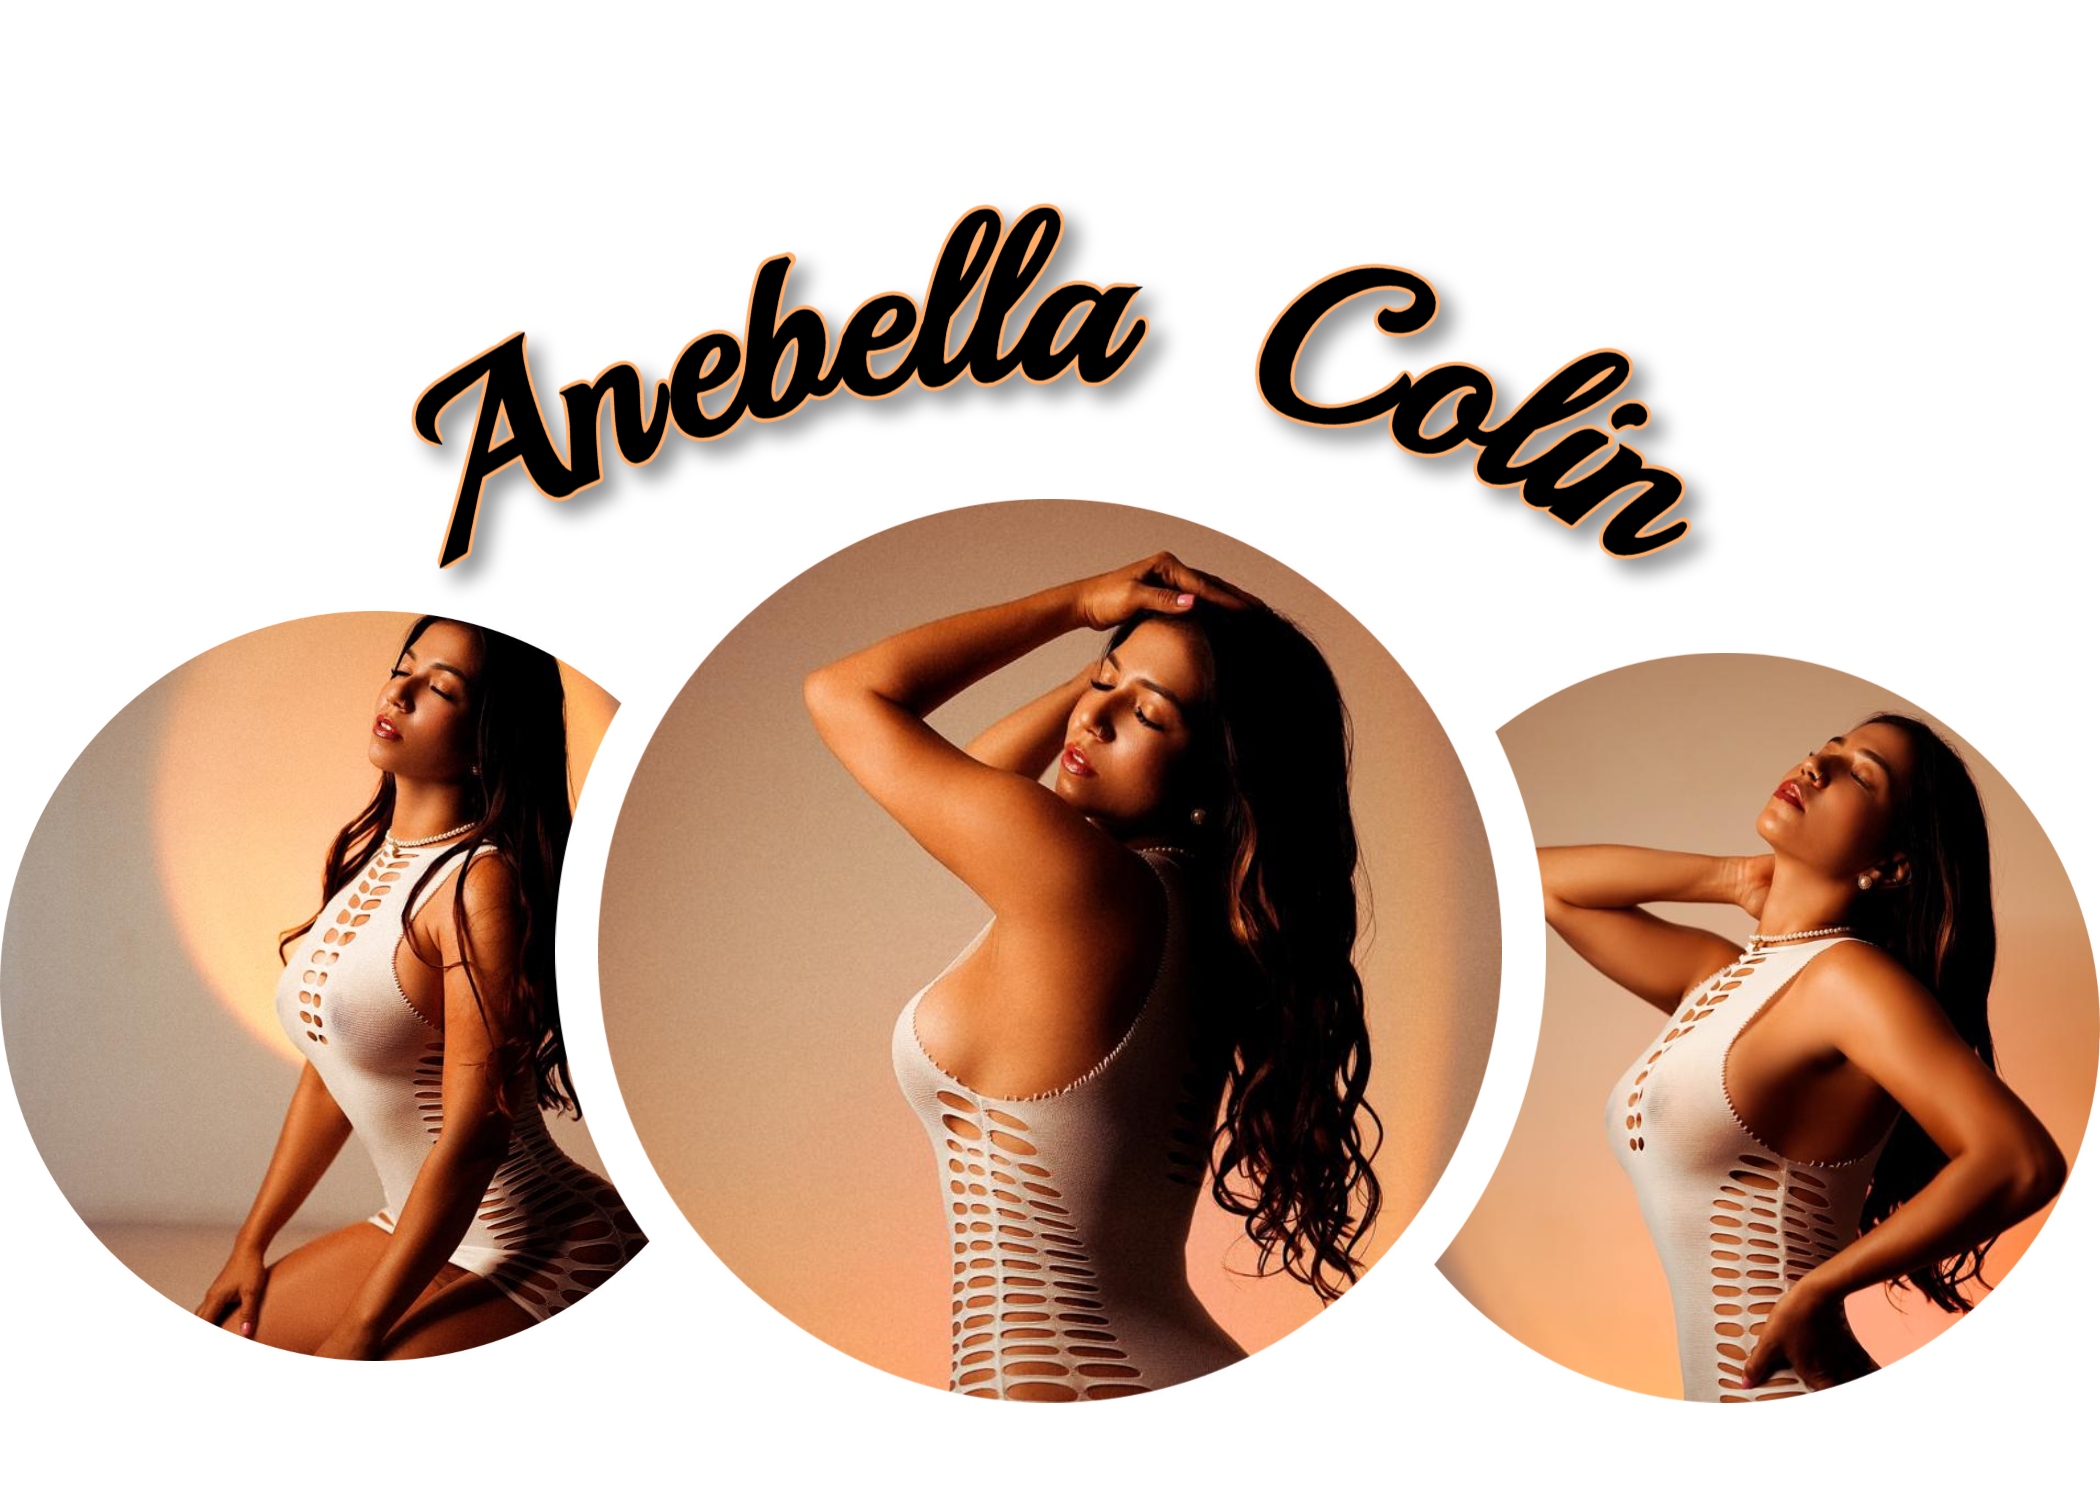 Anabella-Colin WELCOME image: 1